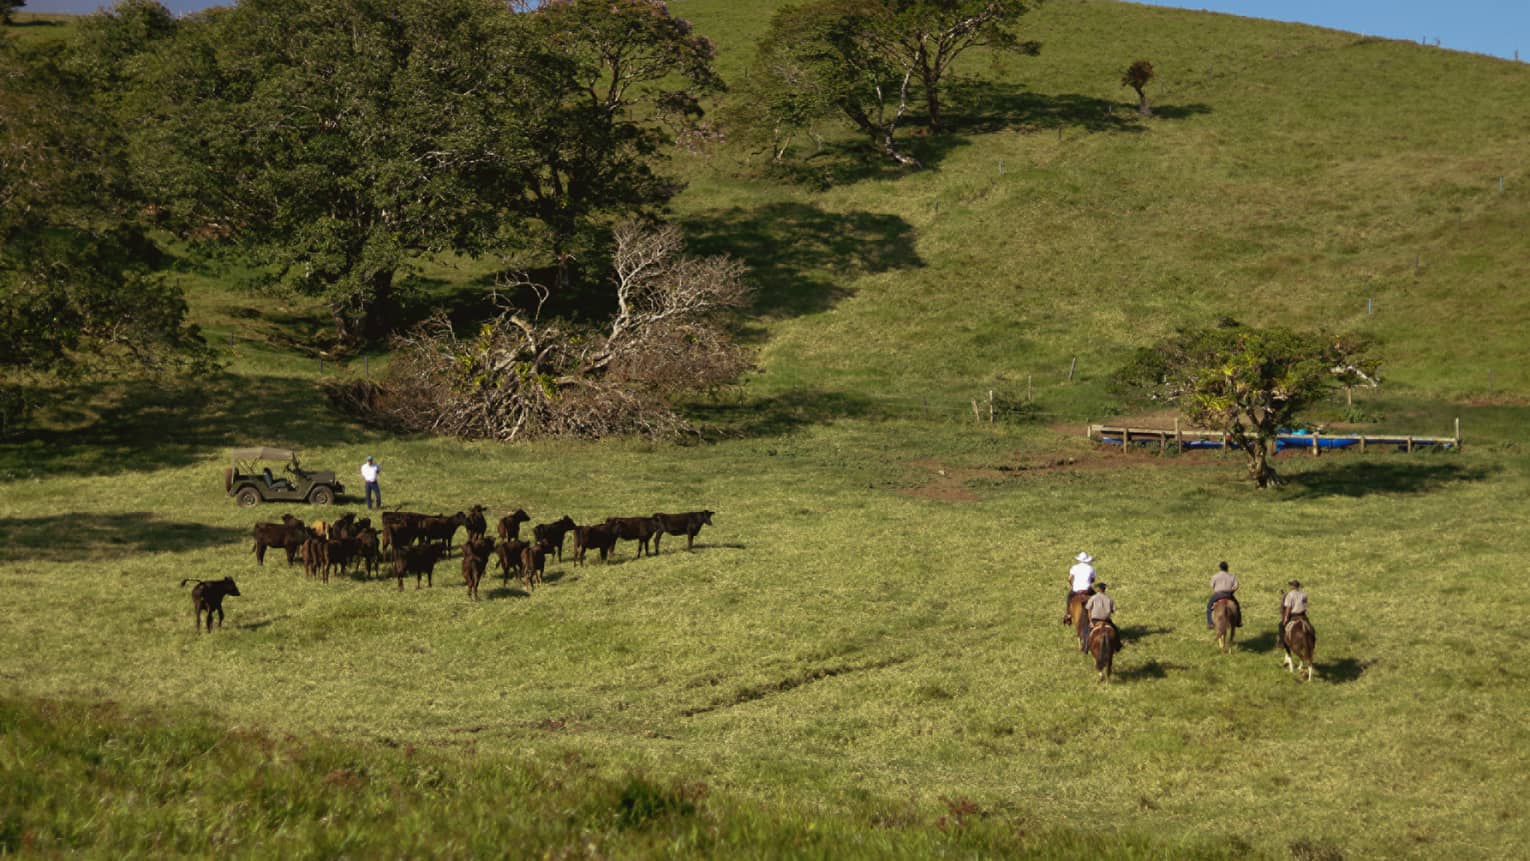 Three cowboys on horseback ride next to a small group of cattle on a green hillside